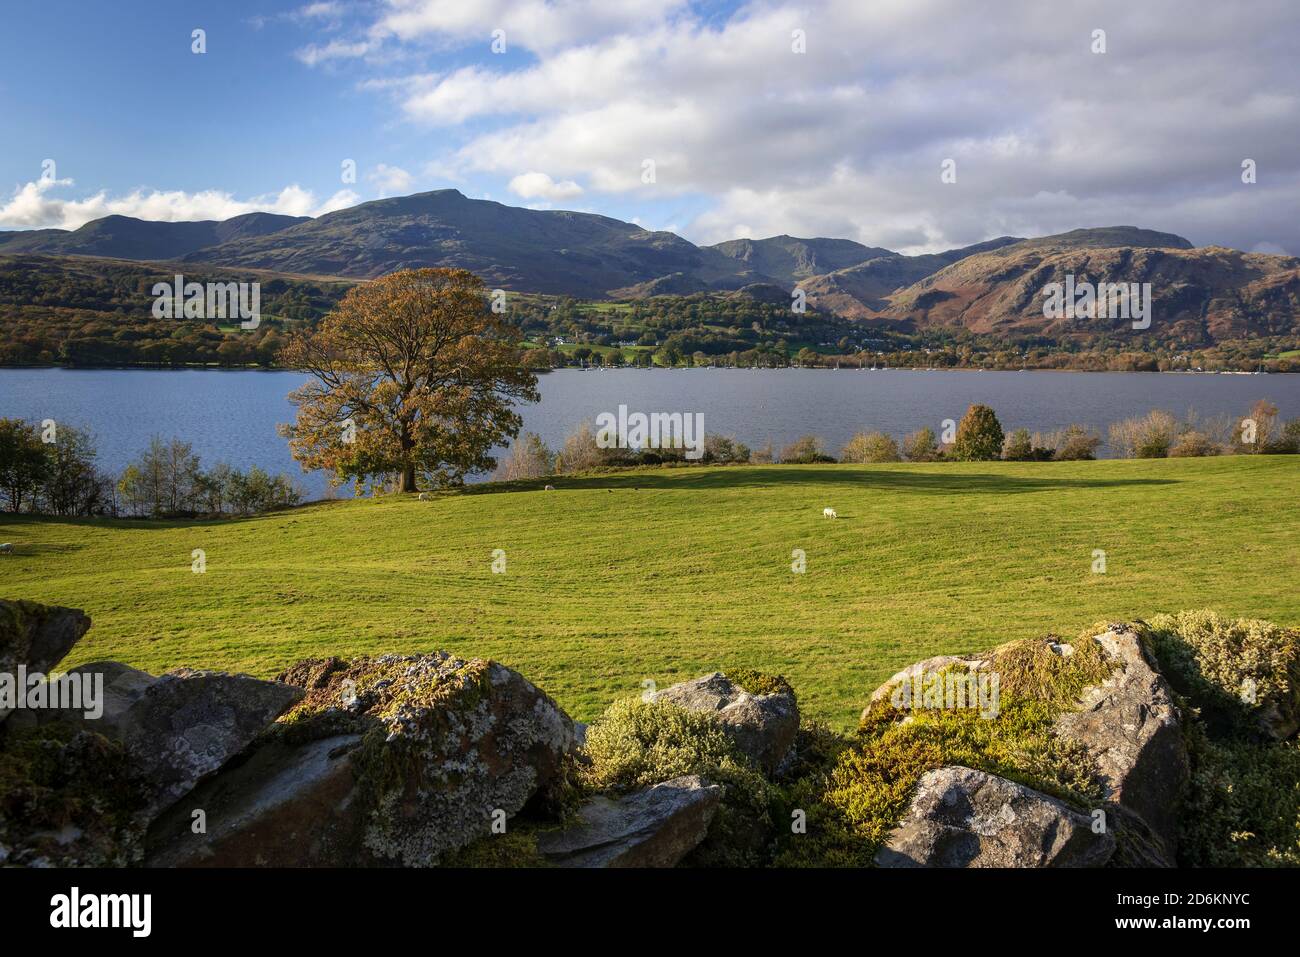 The Old Man of Coniston fell seen above the village and Coniston Water in the lake district. Stock Photo